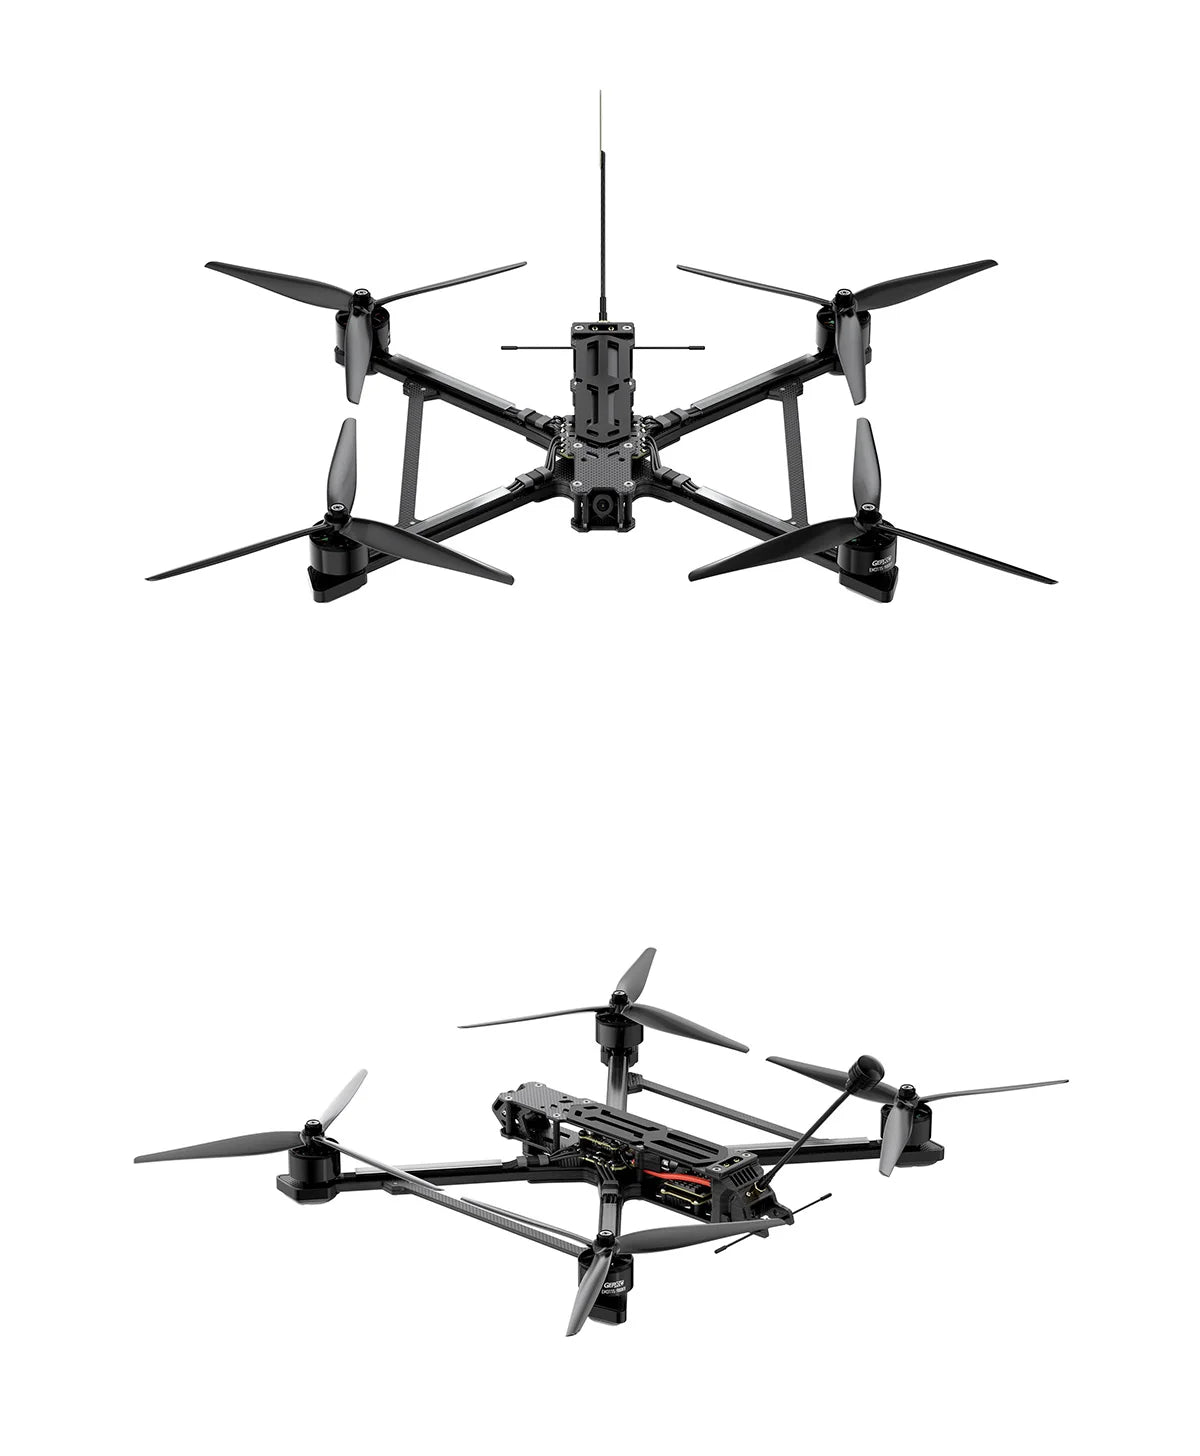 GEPRC EF10 1.2G 2W Long Range 10inch FPV, the model aircraft model has a certain risk,please be sure to operate in a safe